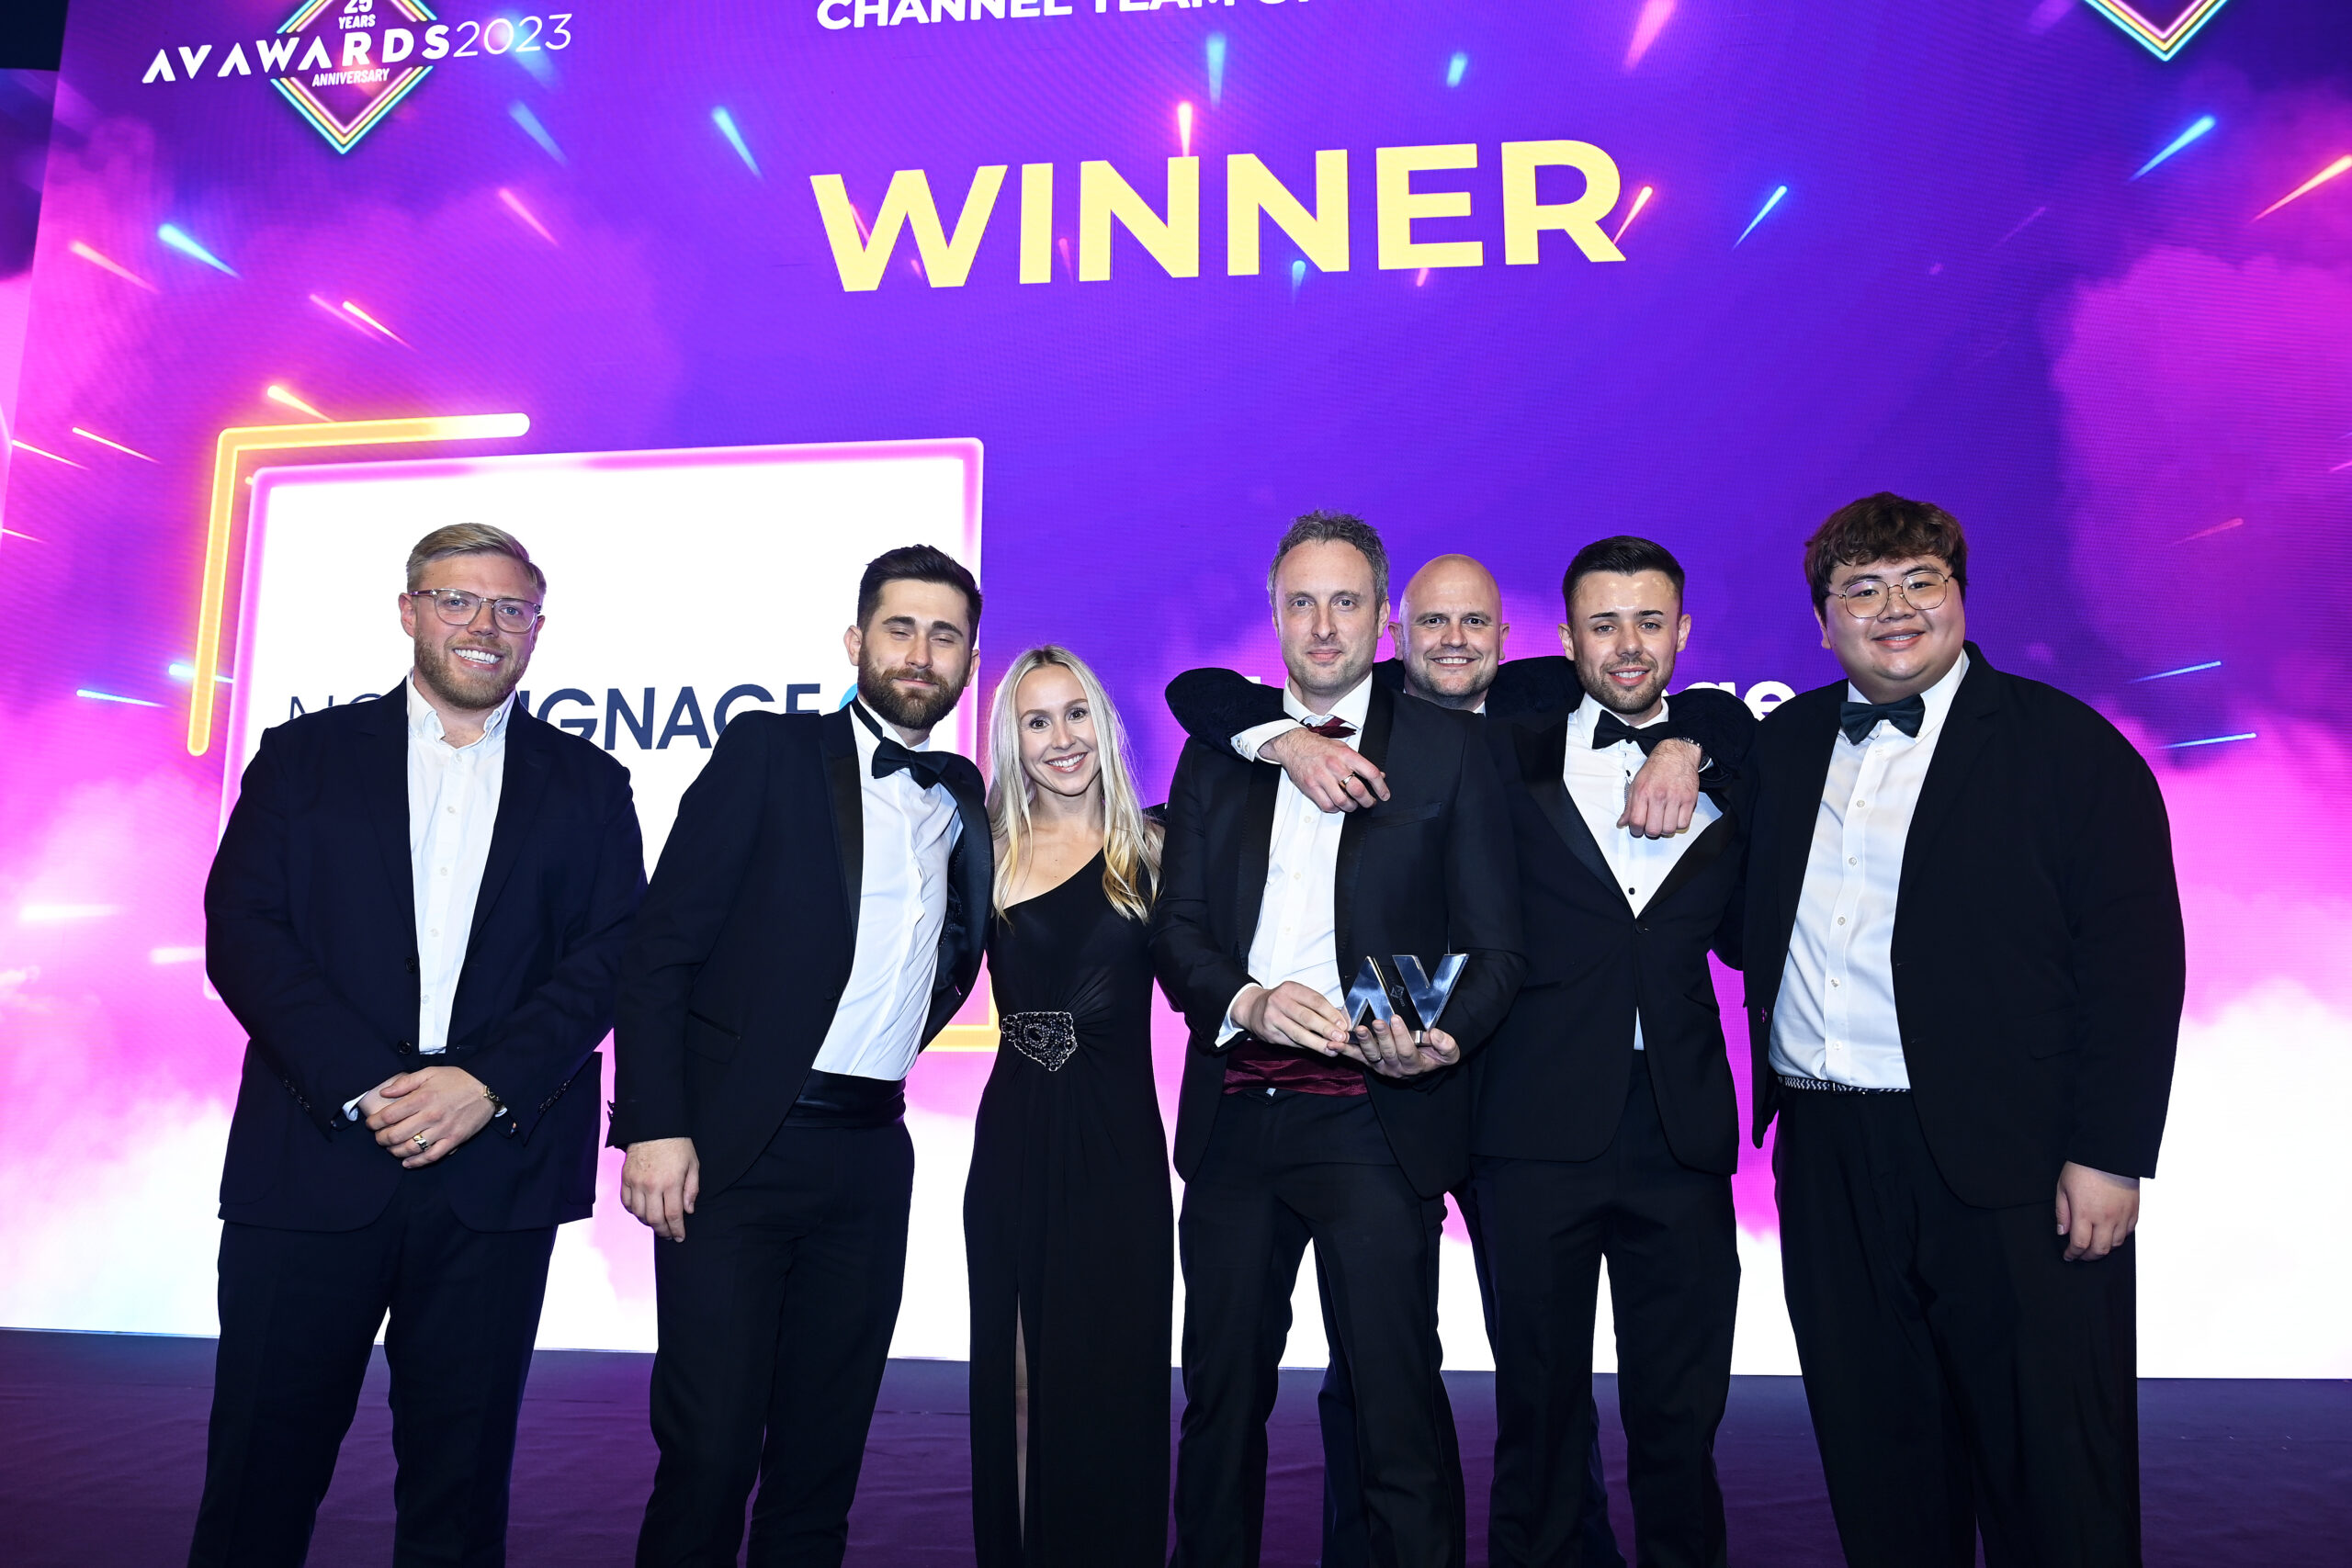 NowSignage wins ‘Channel Team of the Year’ at AV Awards 2023!